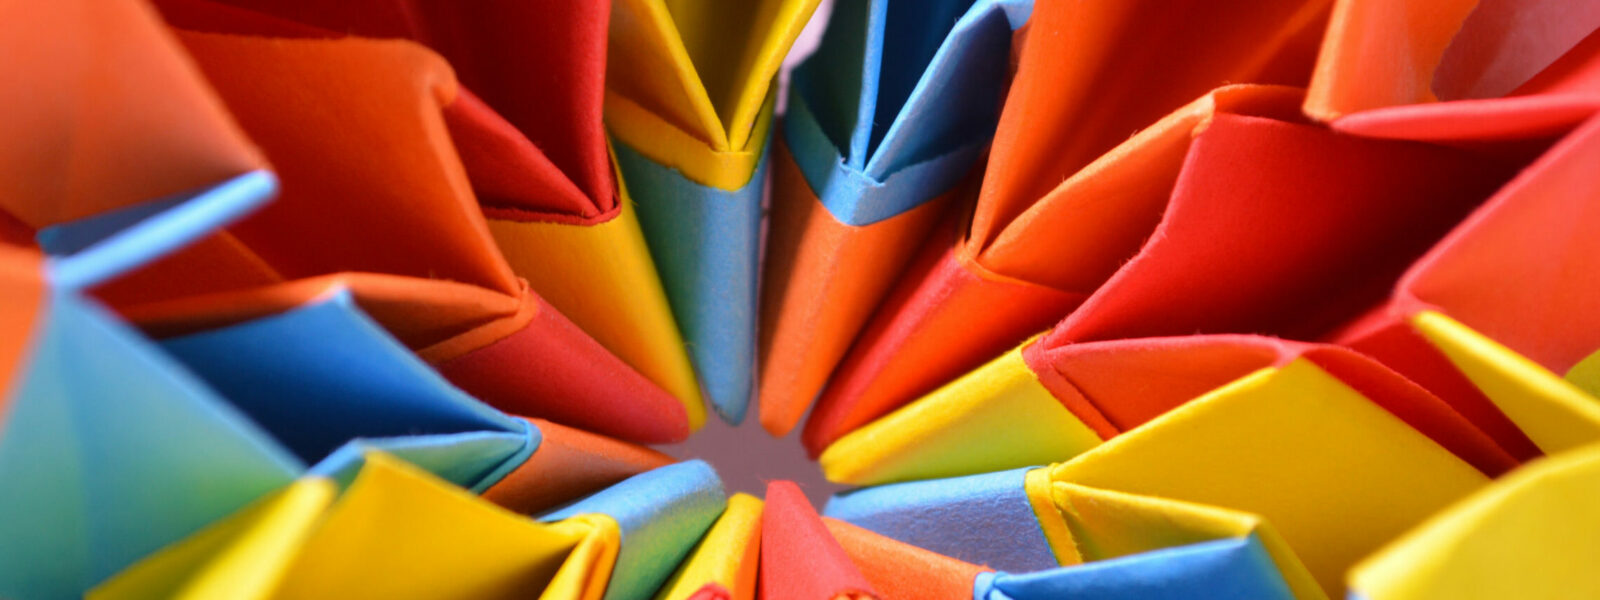 Colorful paper origami close up detail